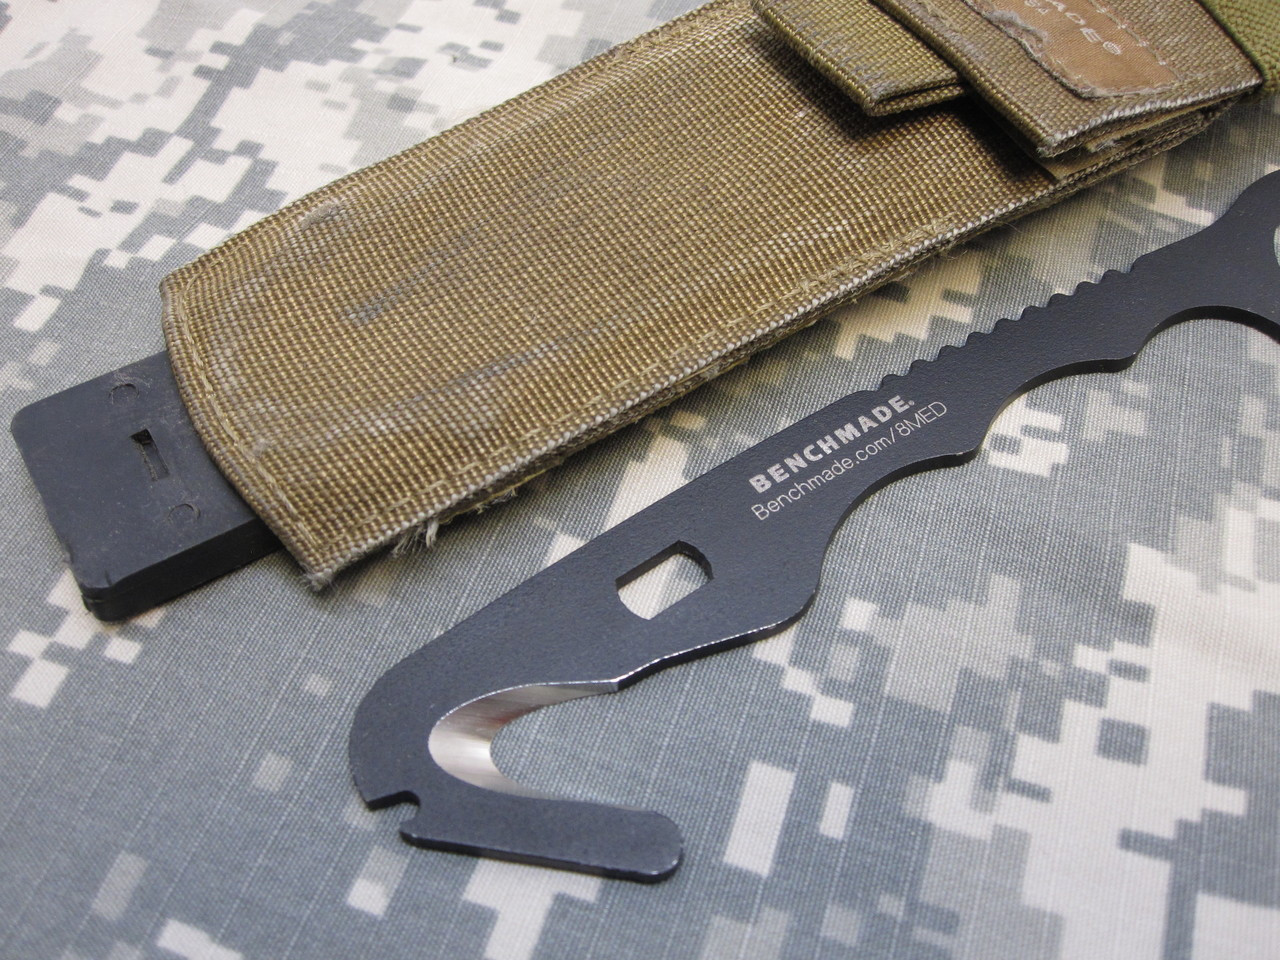 BENCHMADE 8MED RESCUE HOOK KNIFE SAFETY SEATBELT STRAP CUTTER a8 - Centex  Tactical Gear